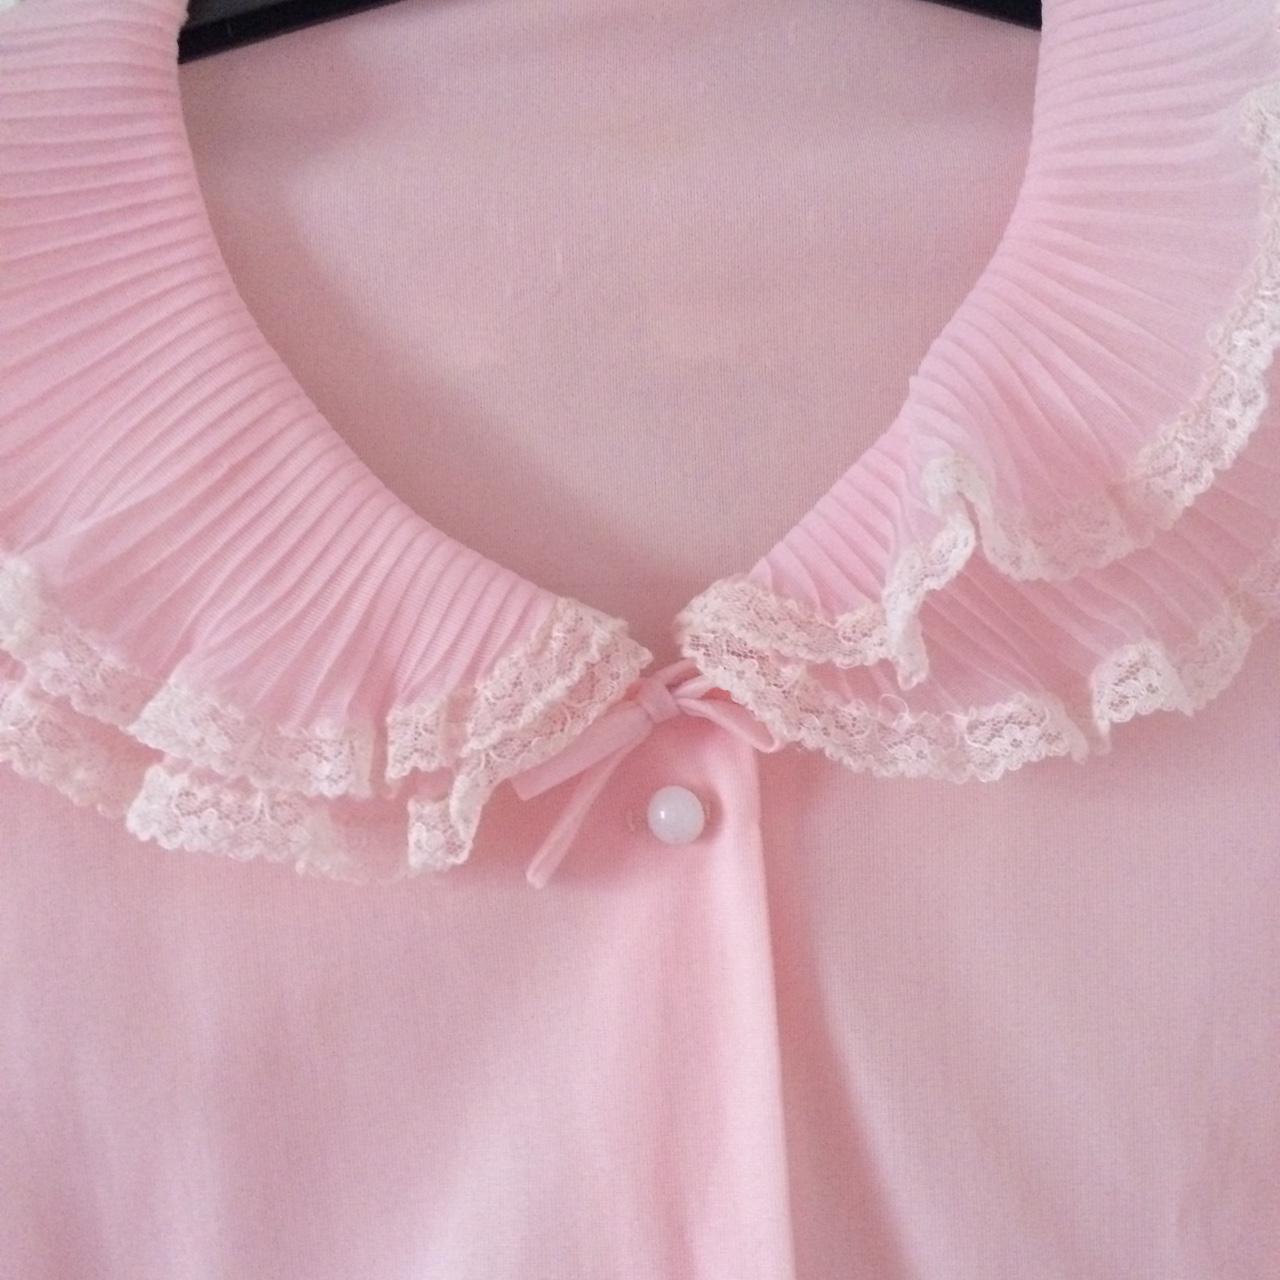 Product Image 3 - Pale pink frilly lolita vintage